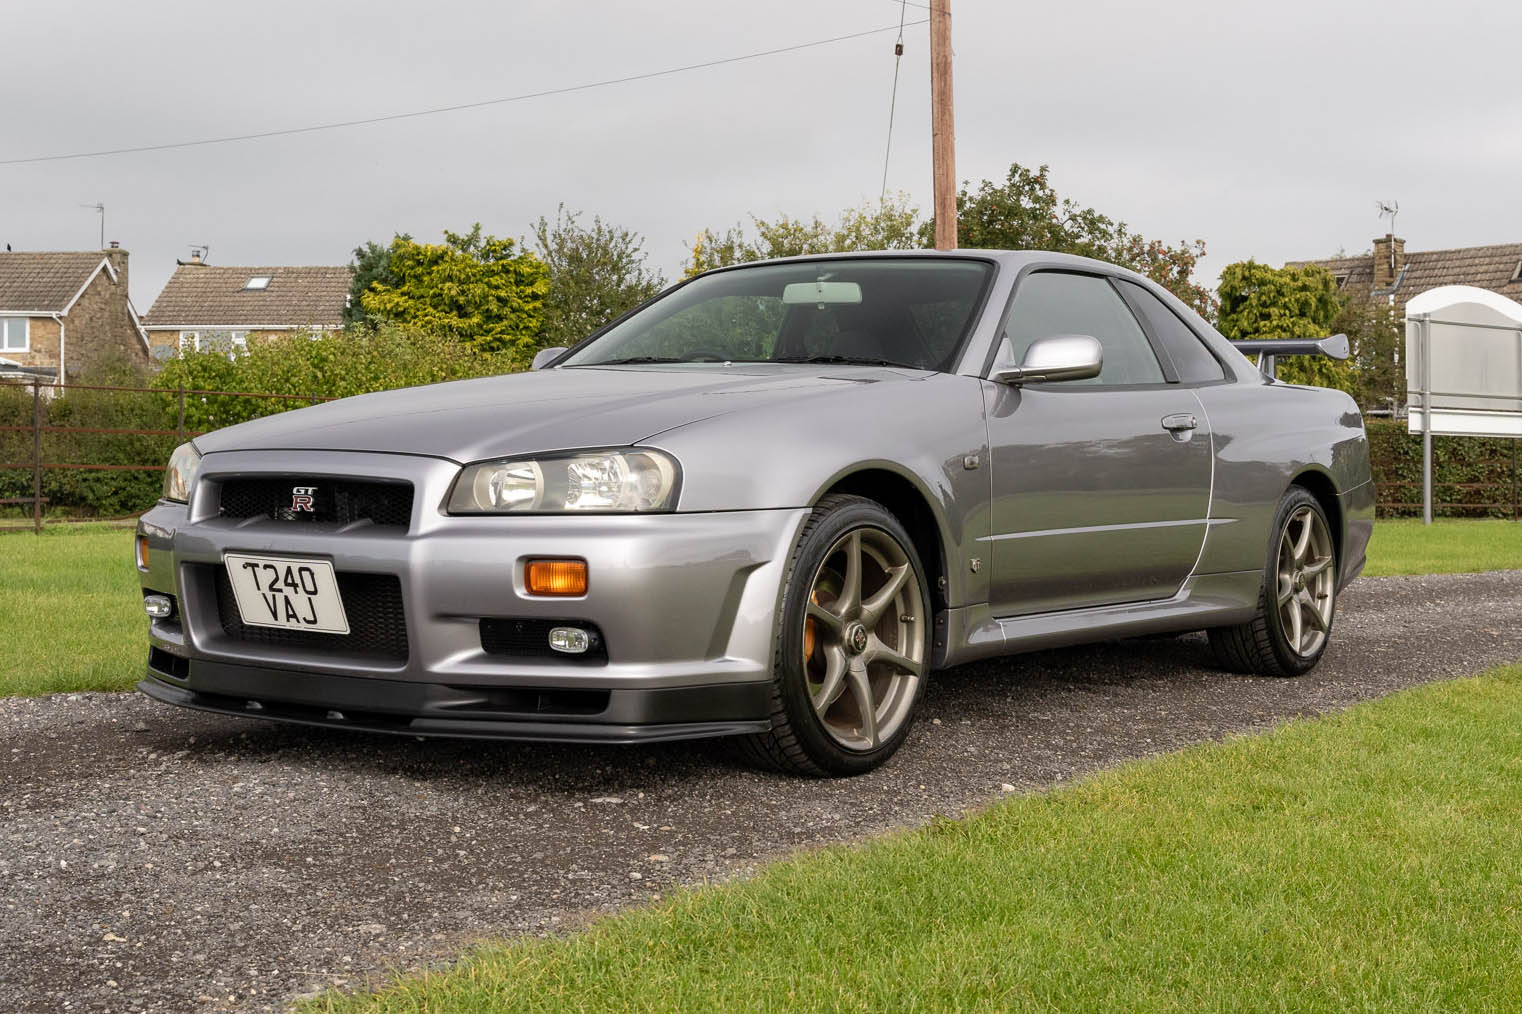 1999 NISSAN SKYLINE (R34) GT-R V-SPEC for sale by auction in York